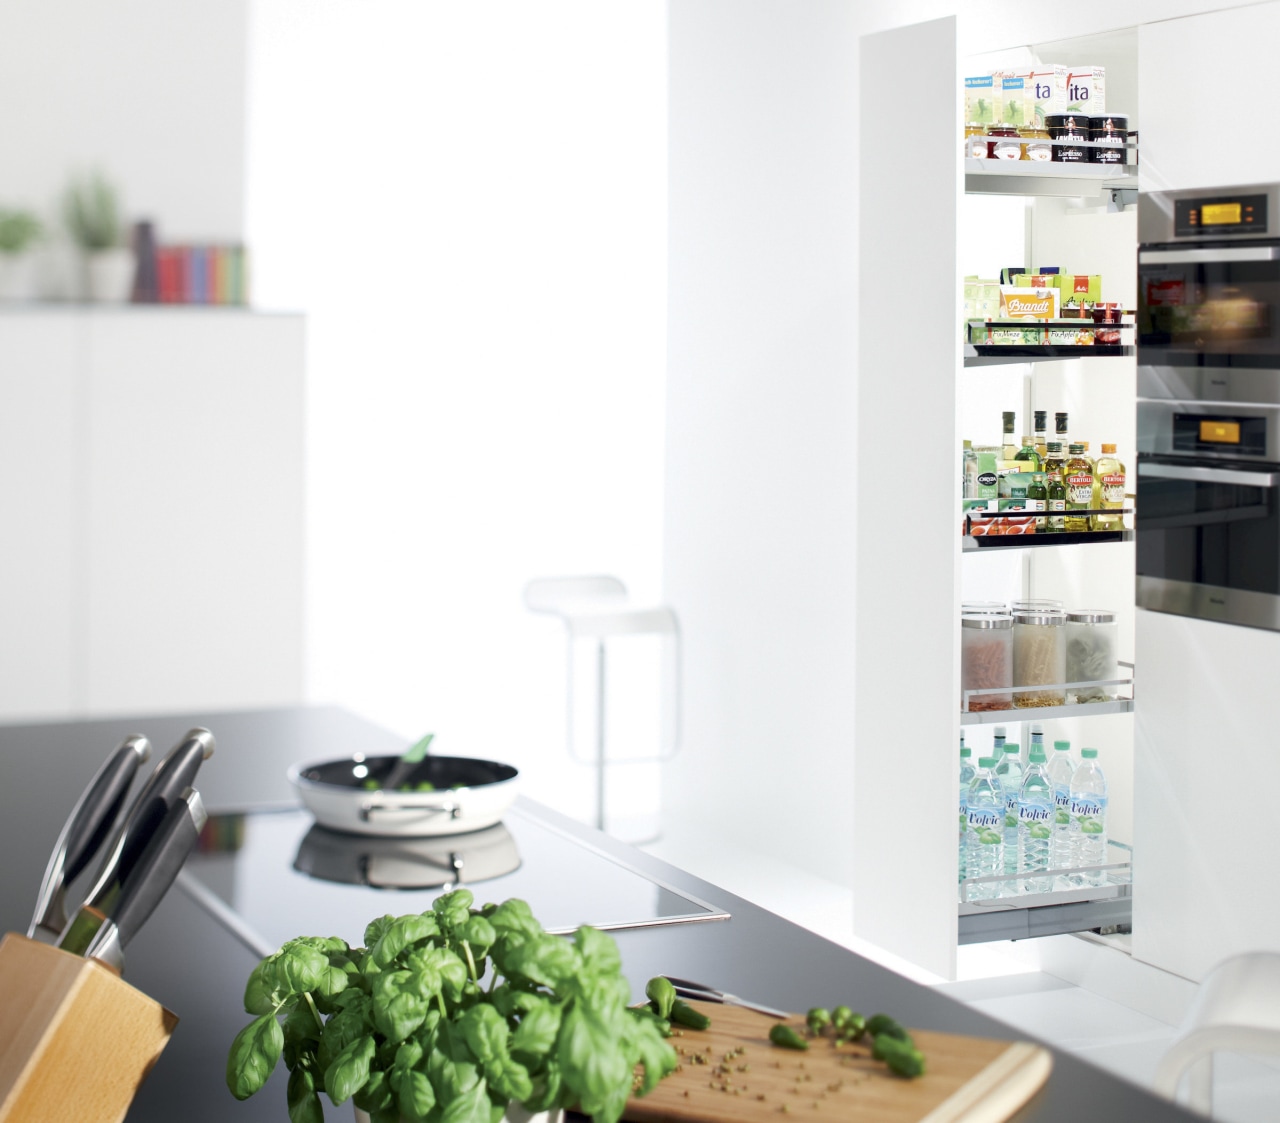 View of kitchen with plant and knifeblock in furniture, home appliance, interior design, kitchen appliance, product, product design, refrigerator, shelf, shelving, small appliance, table, white